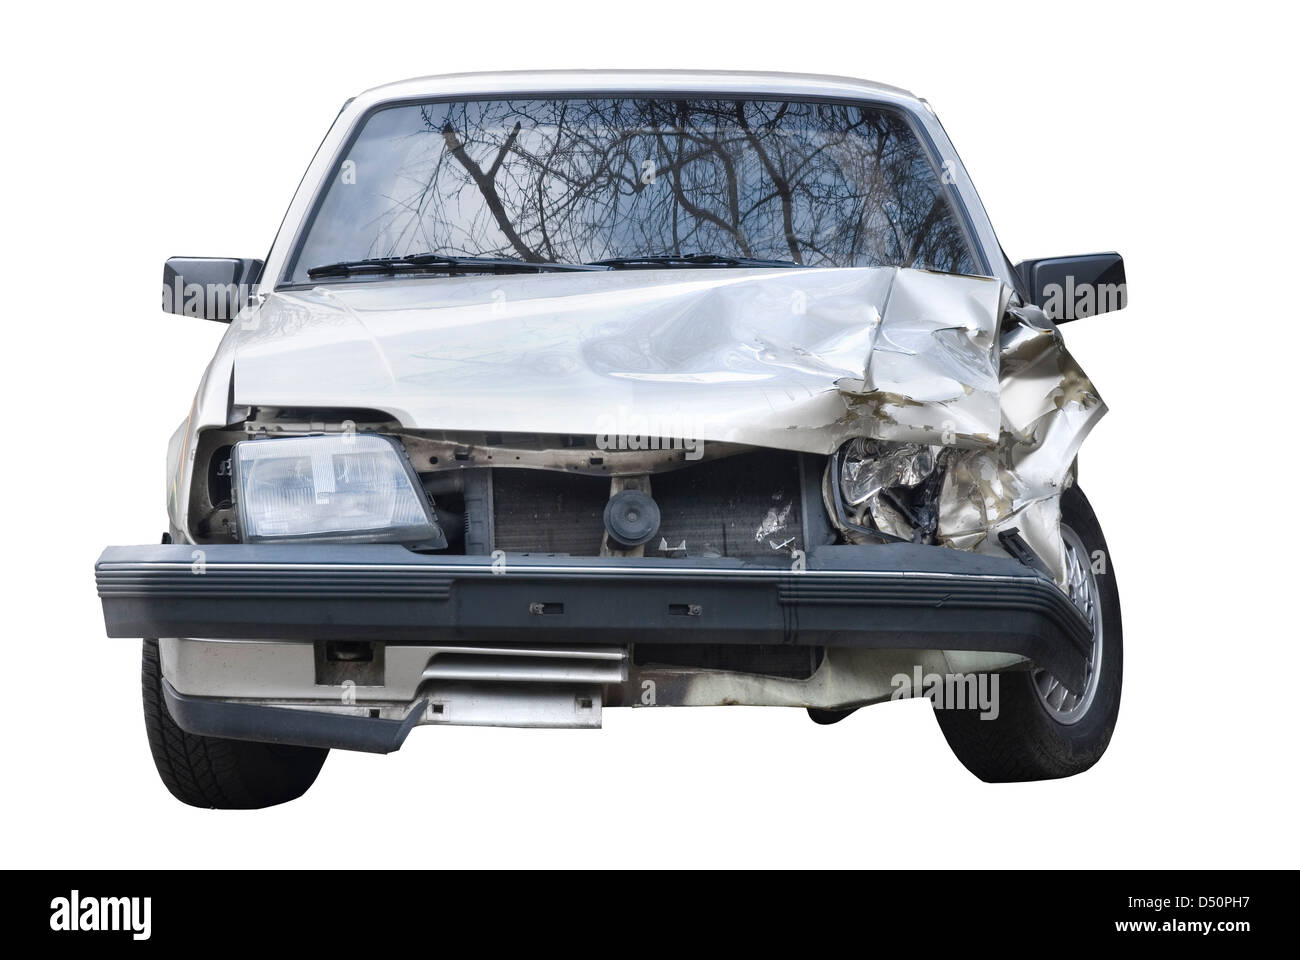 Car after crash against white background Stock Photo